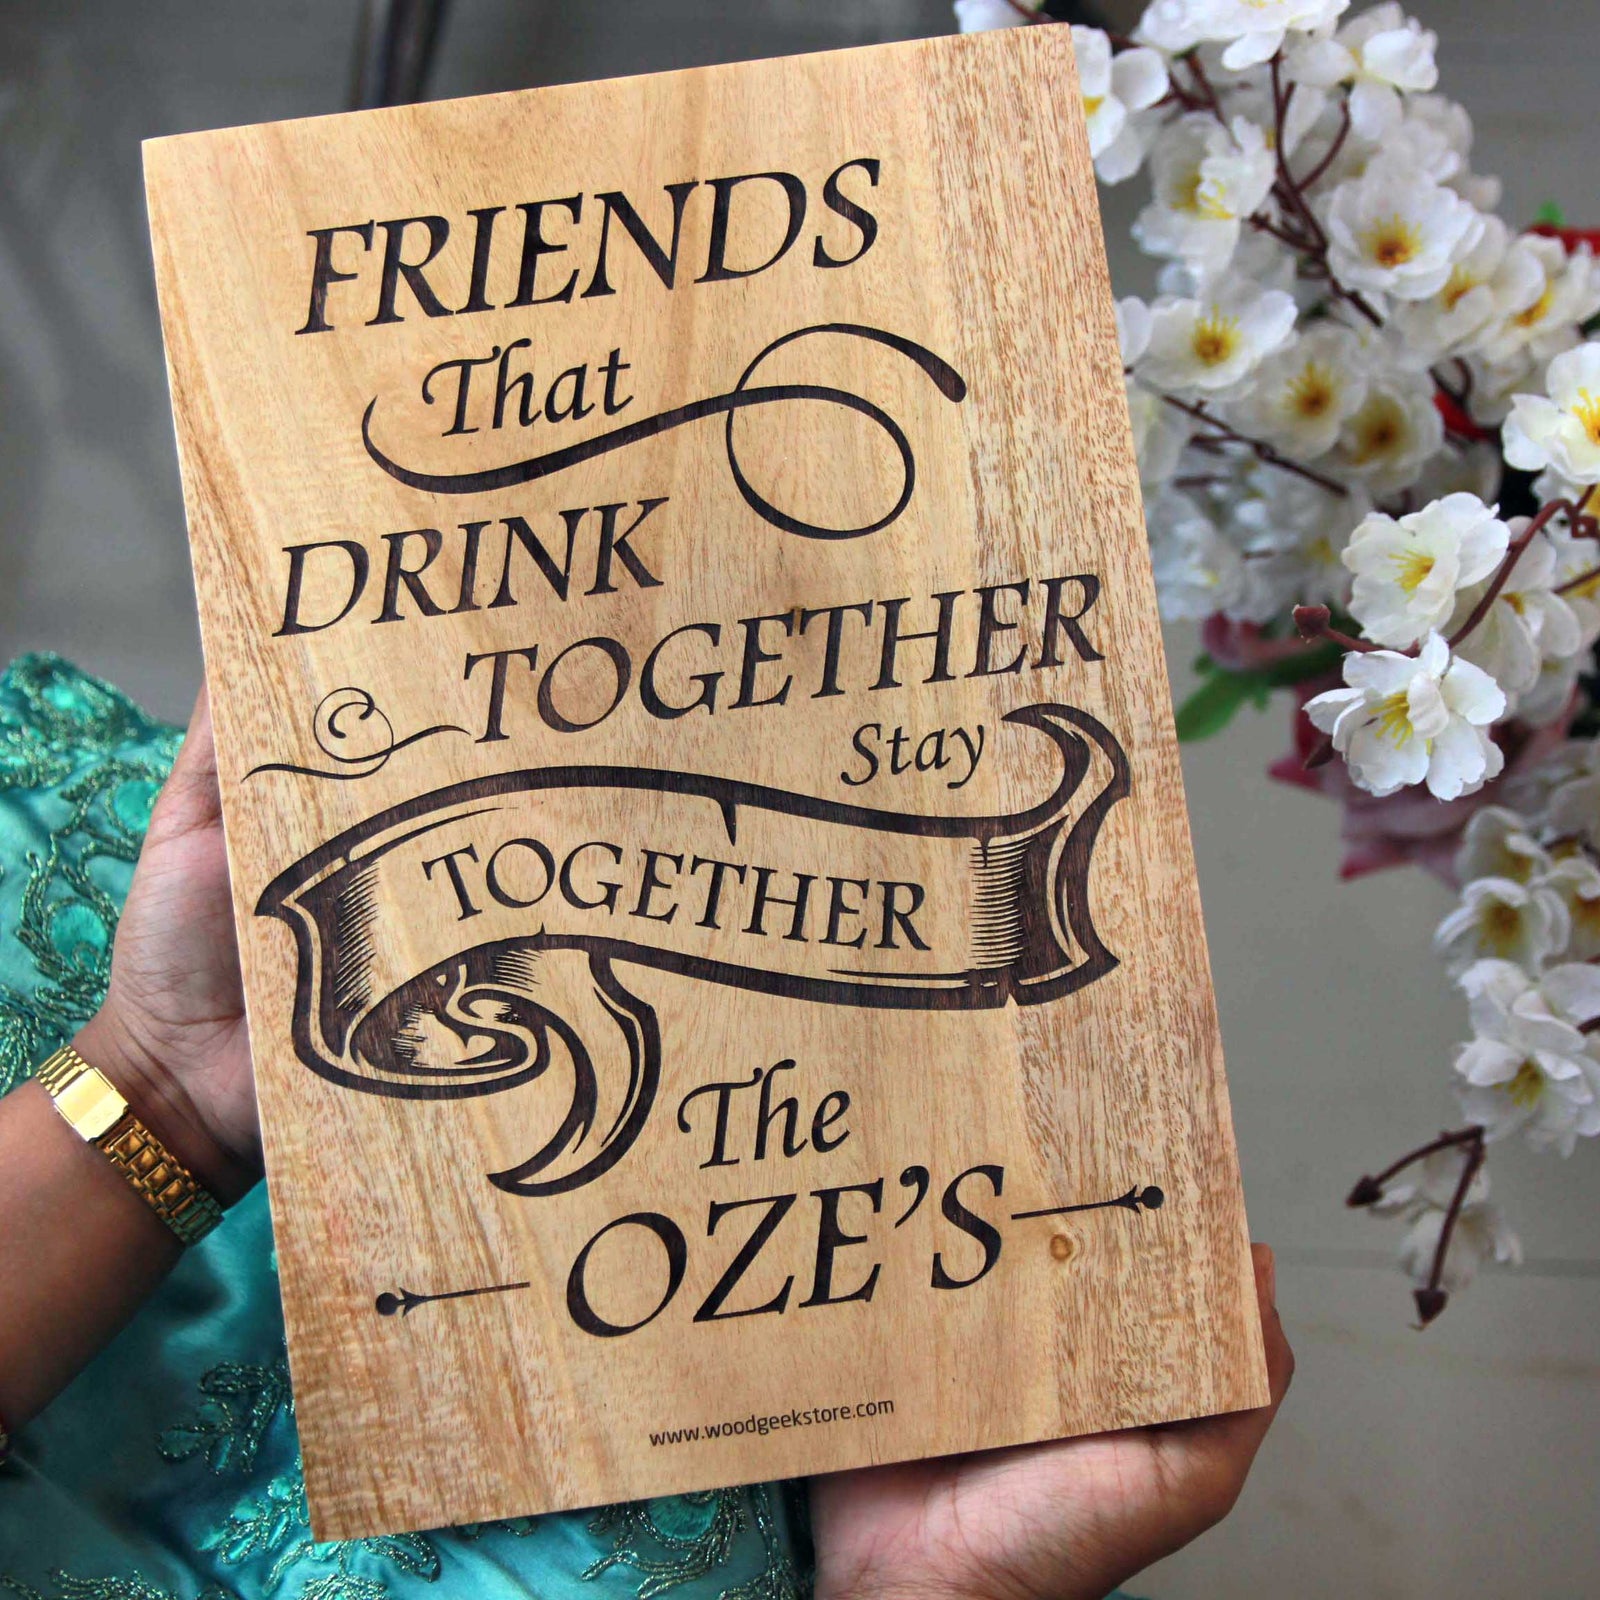 33 Birthday Gifts For Your Best Friends